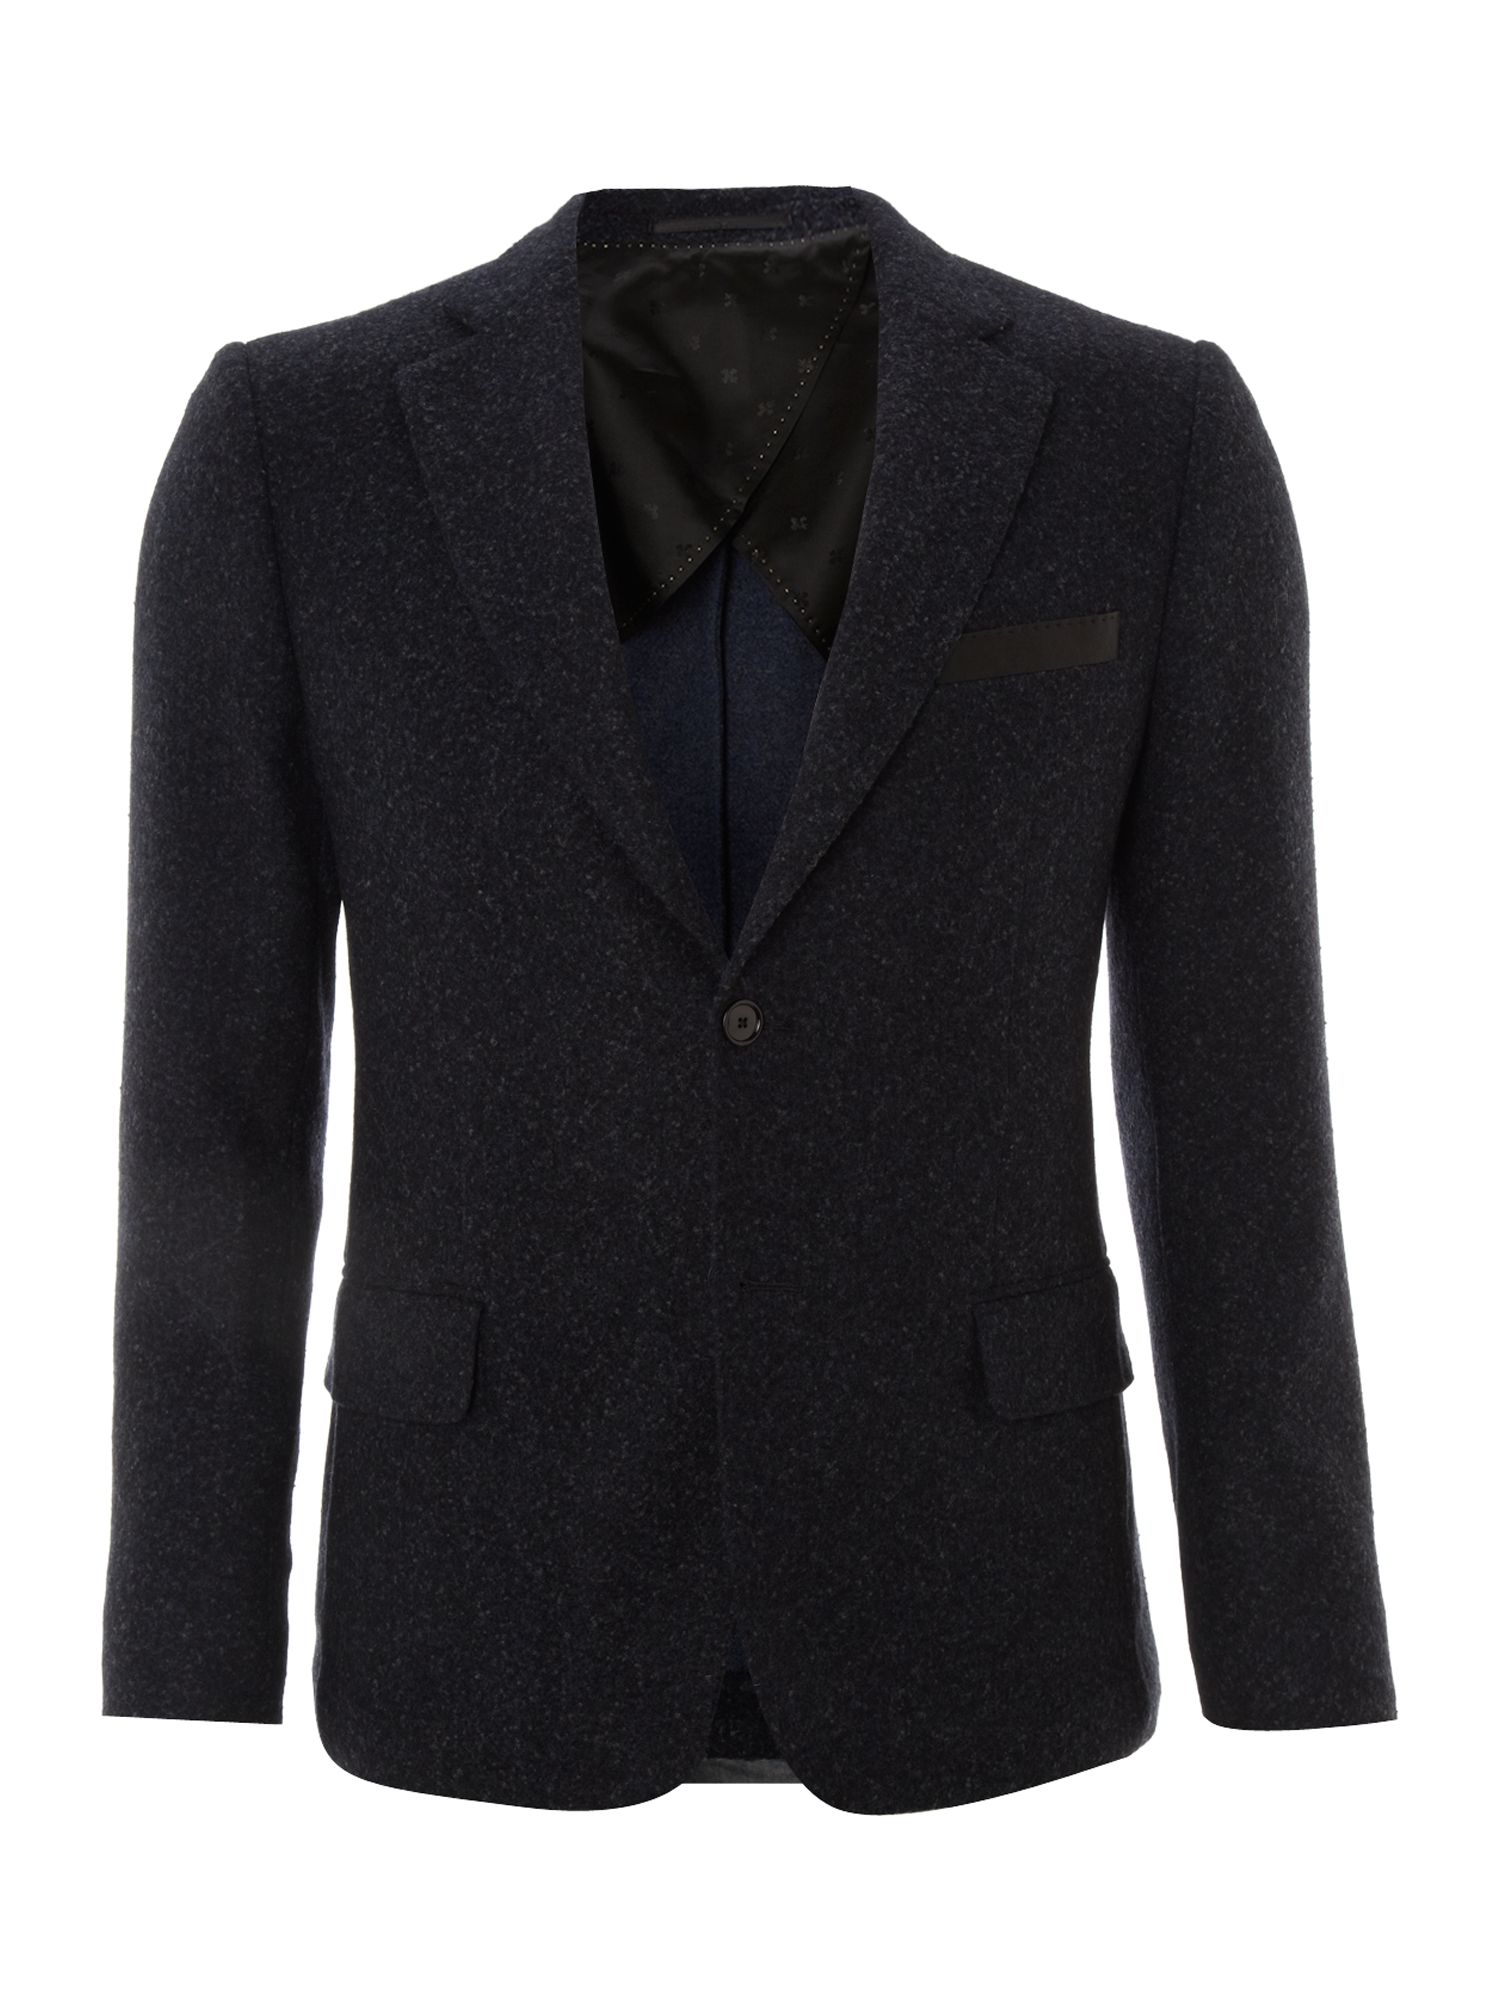 Patrick Cox Wool Jacket with Leather Trim in Blue for Men (navy) | Lyst